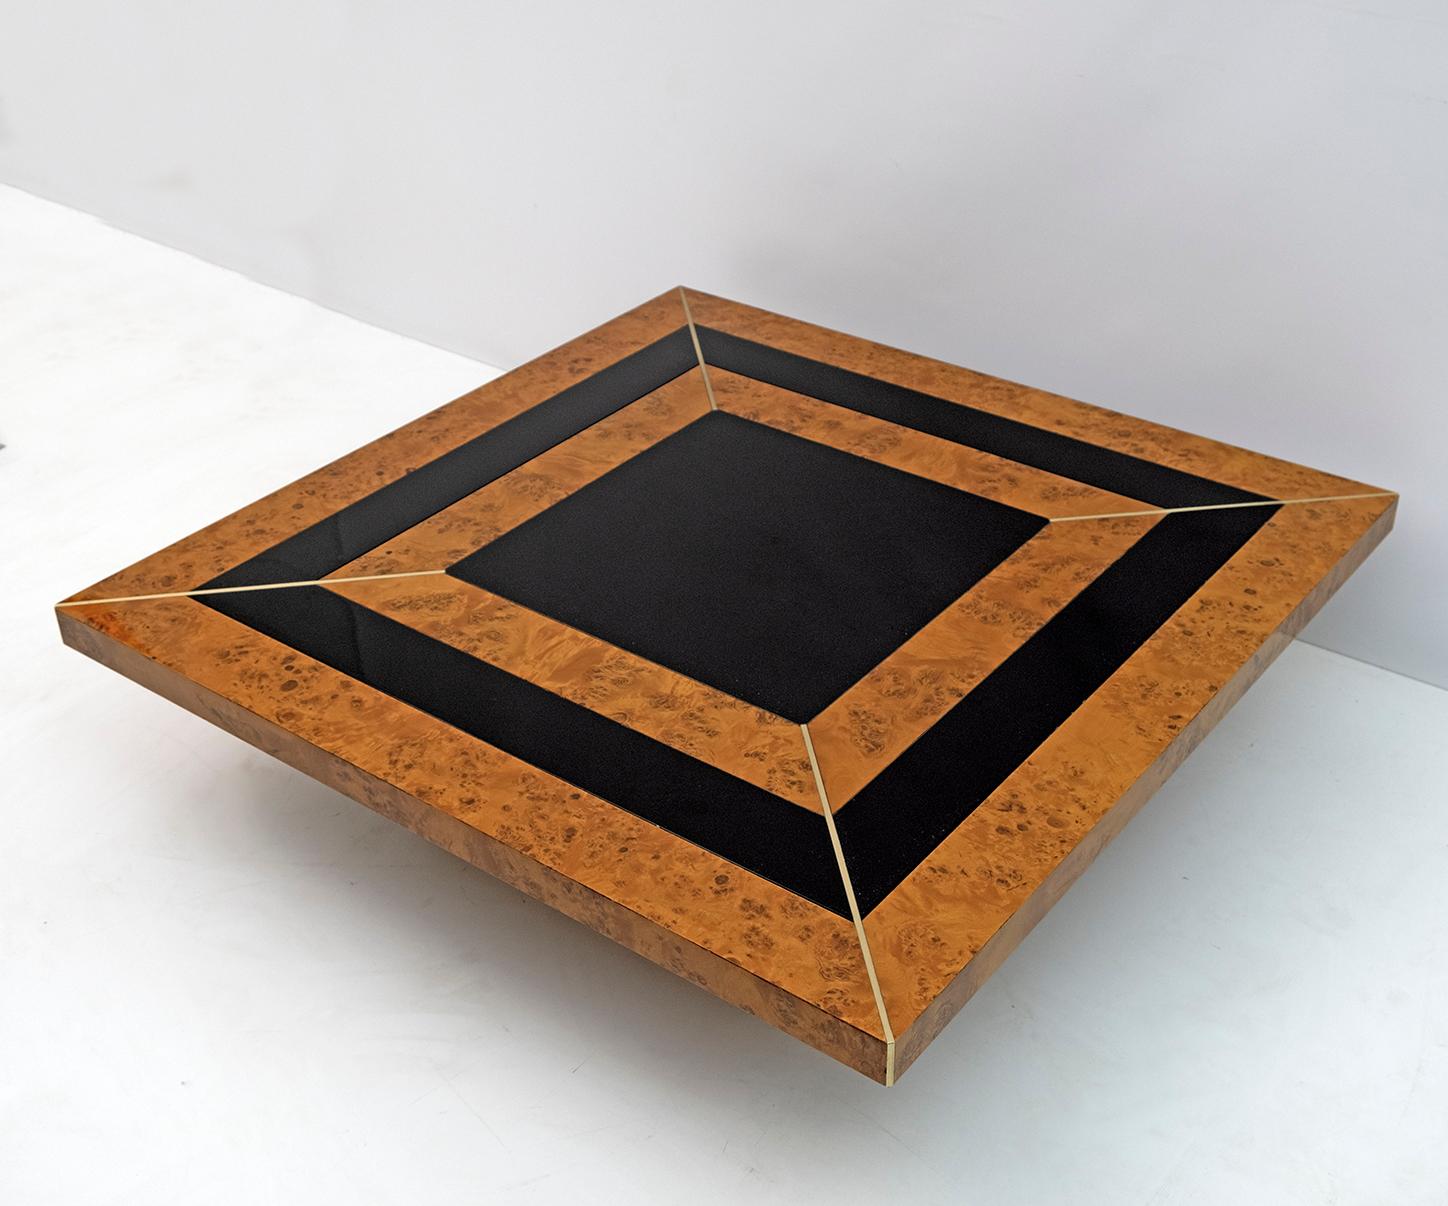 Late 20th Century Art Déco Style Italian Walnut and Lacquer Coffee Table, 1970s For Sale